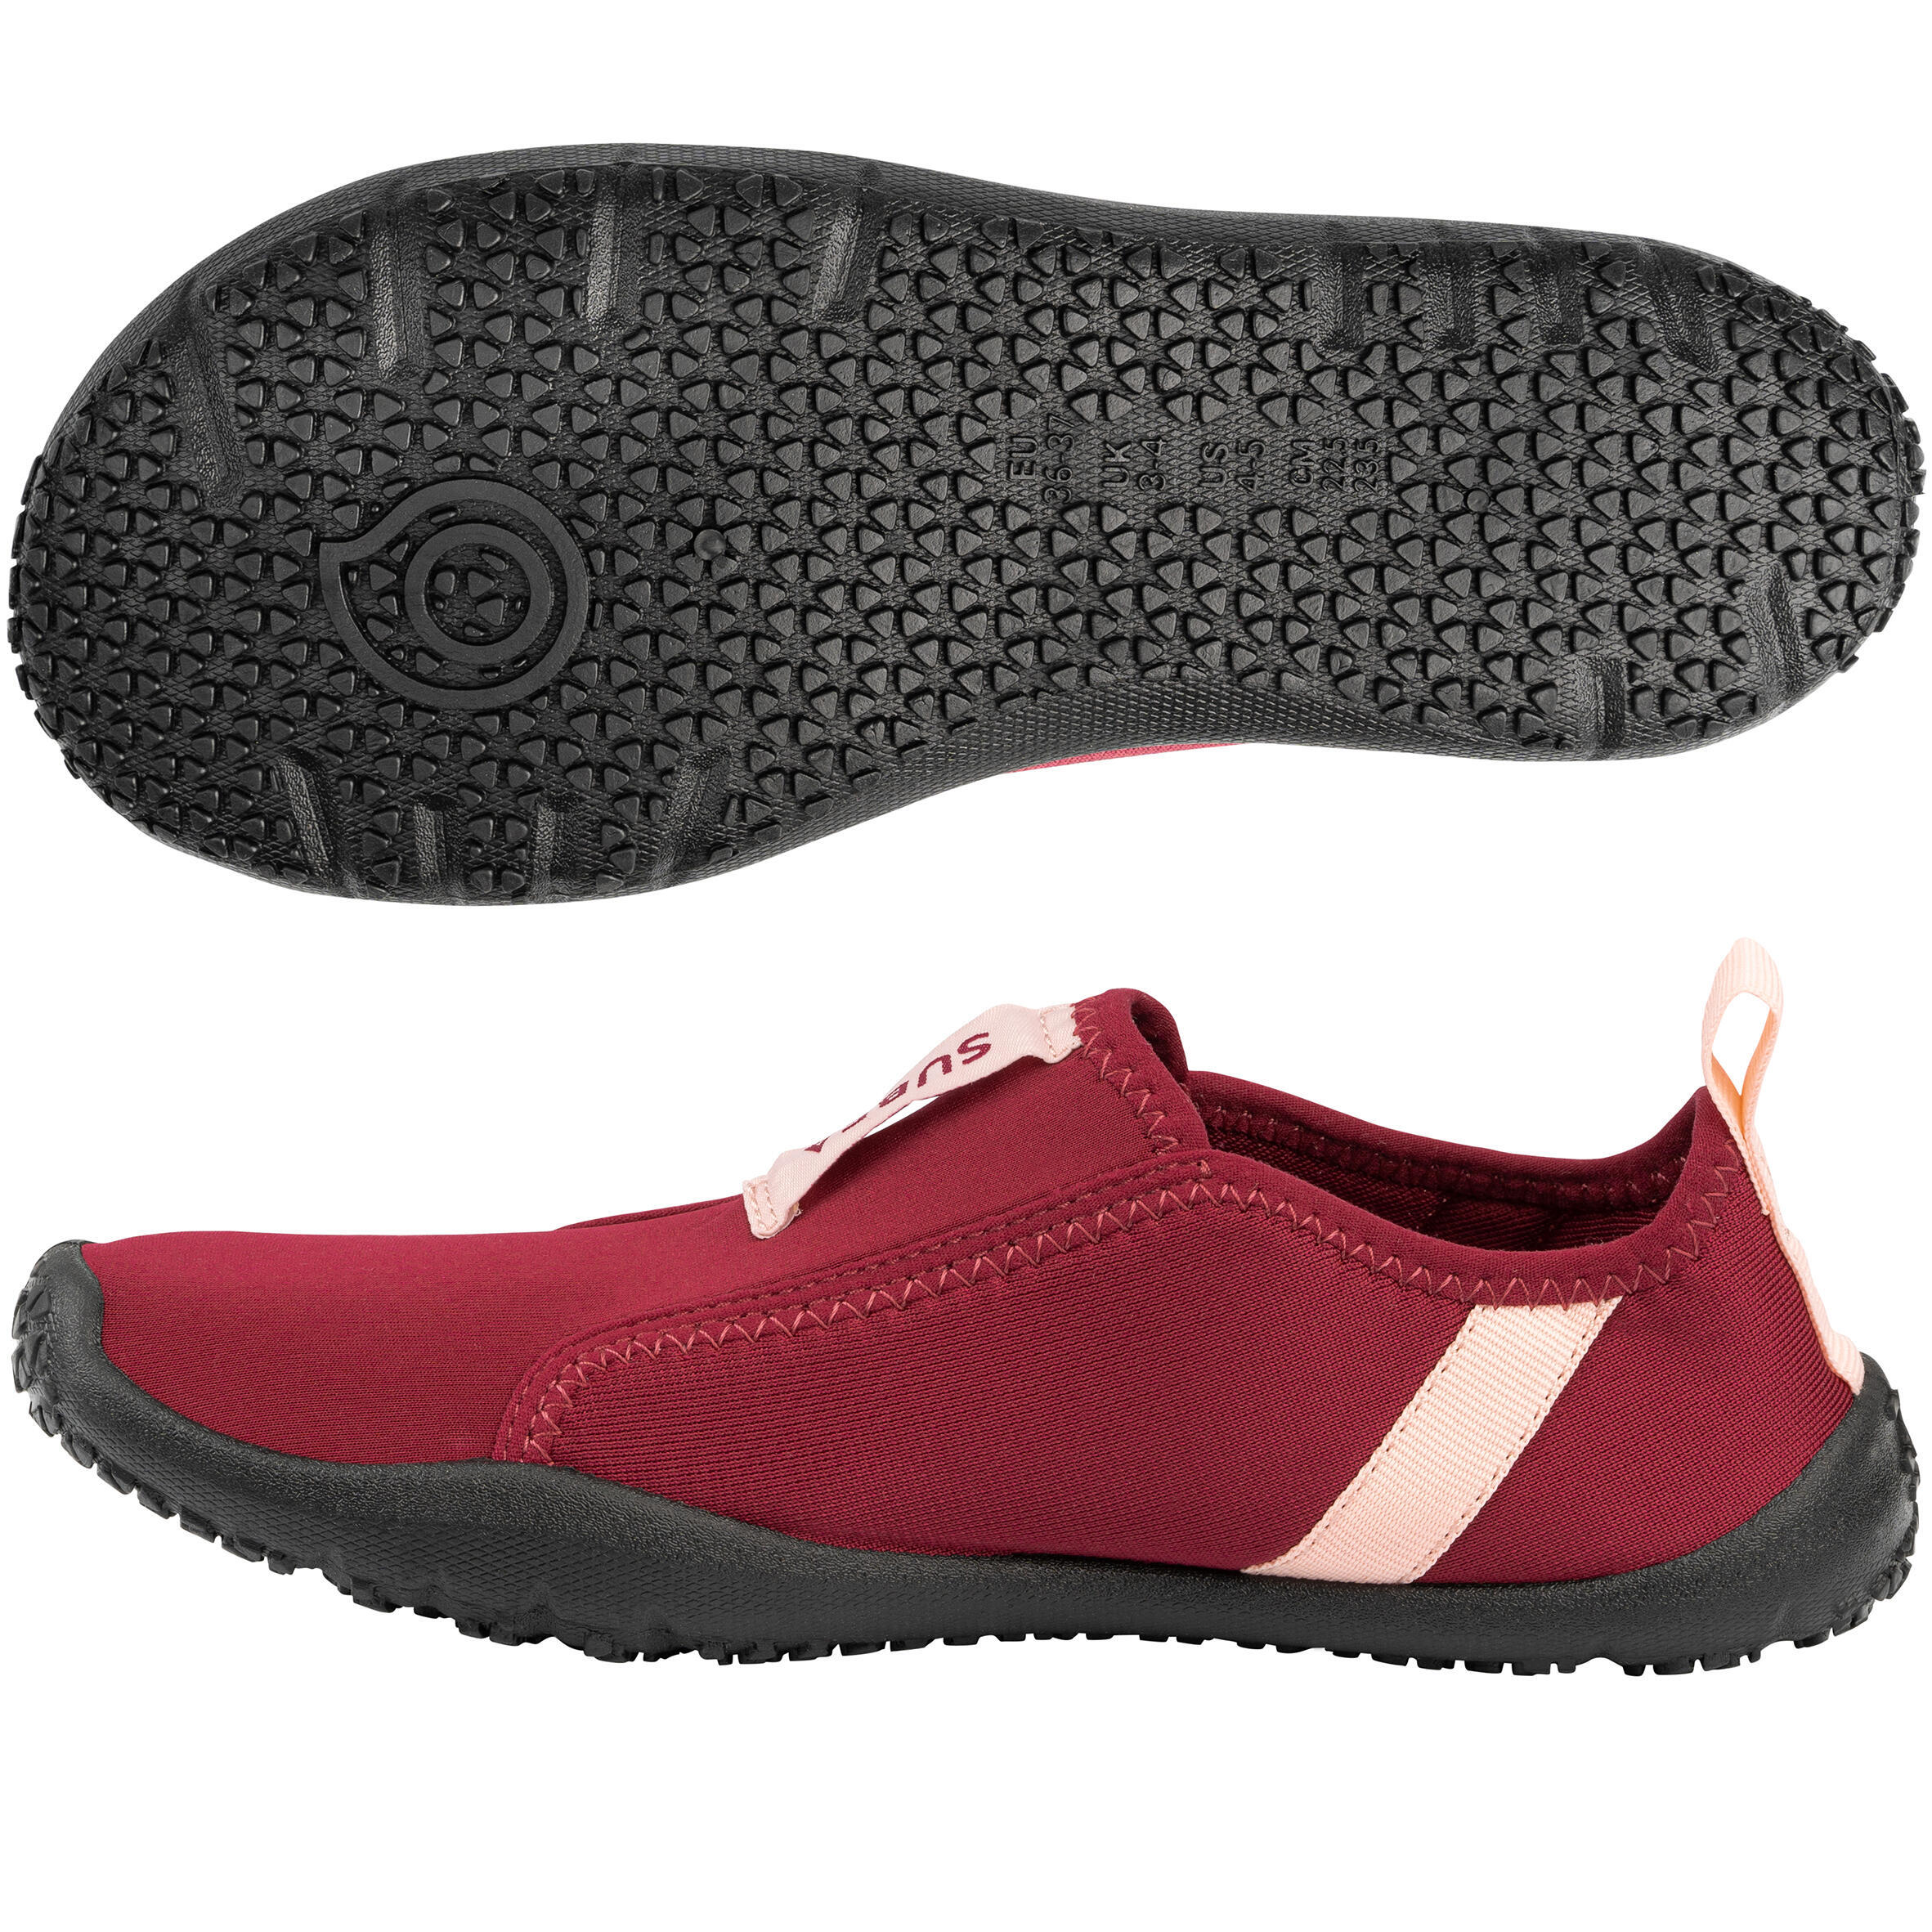 Adult Elasticated Water Shoes Aquashoes 120 - Red 10/14